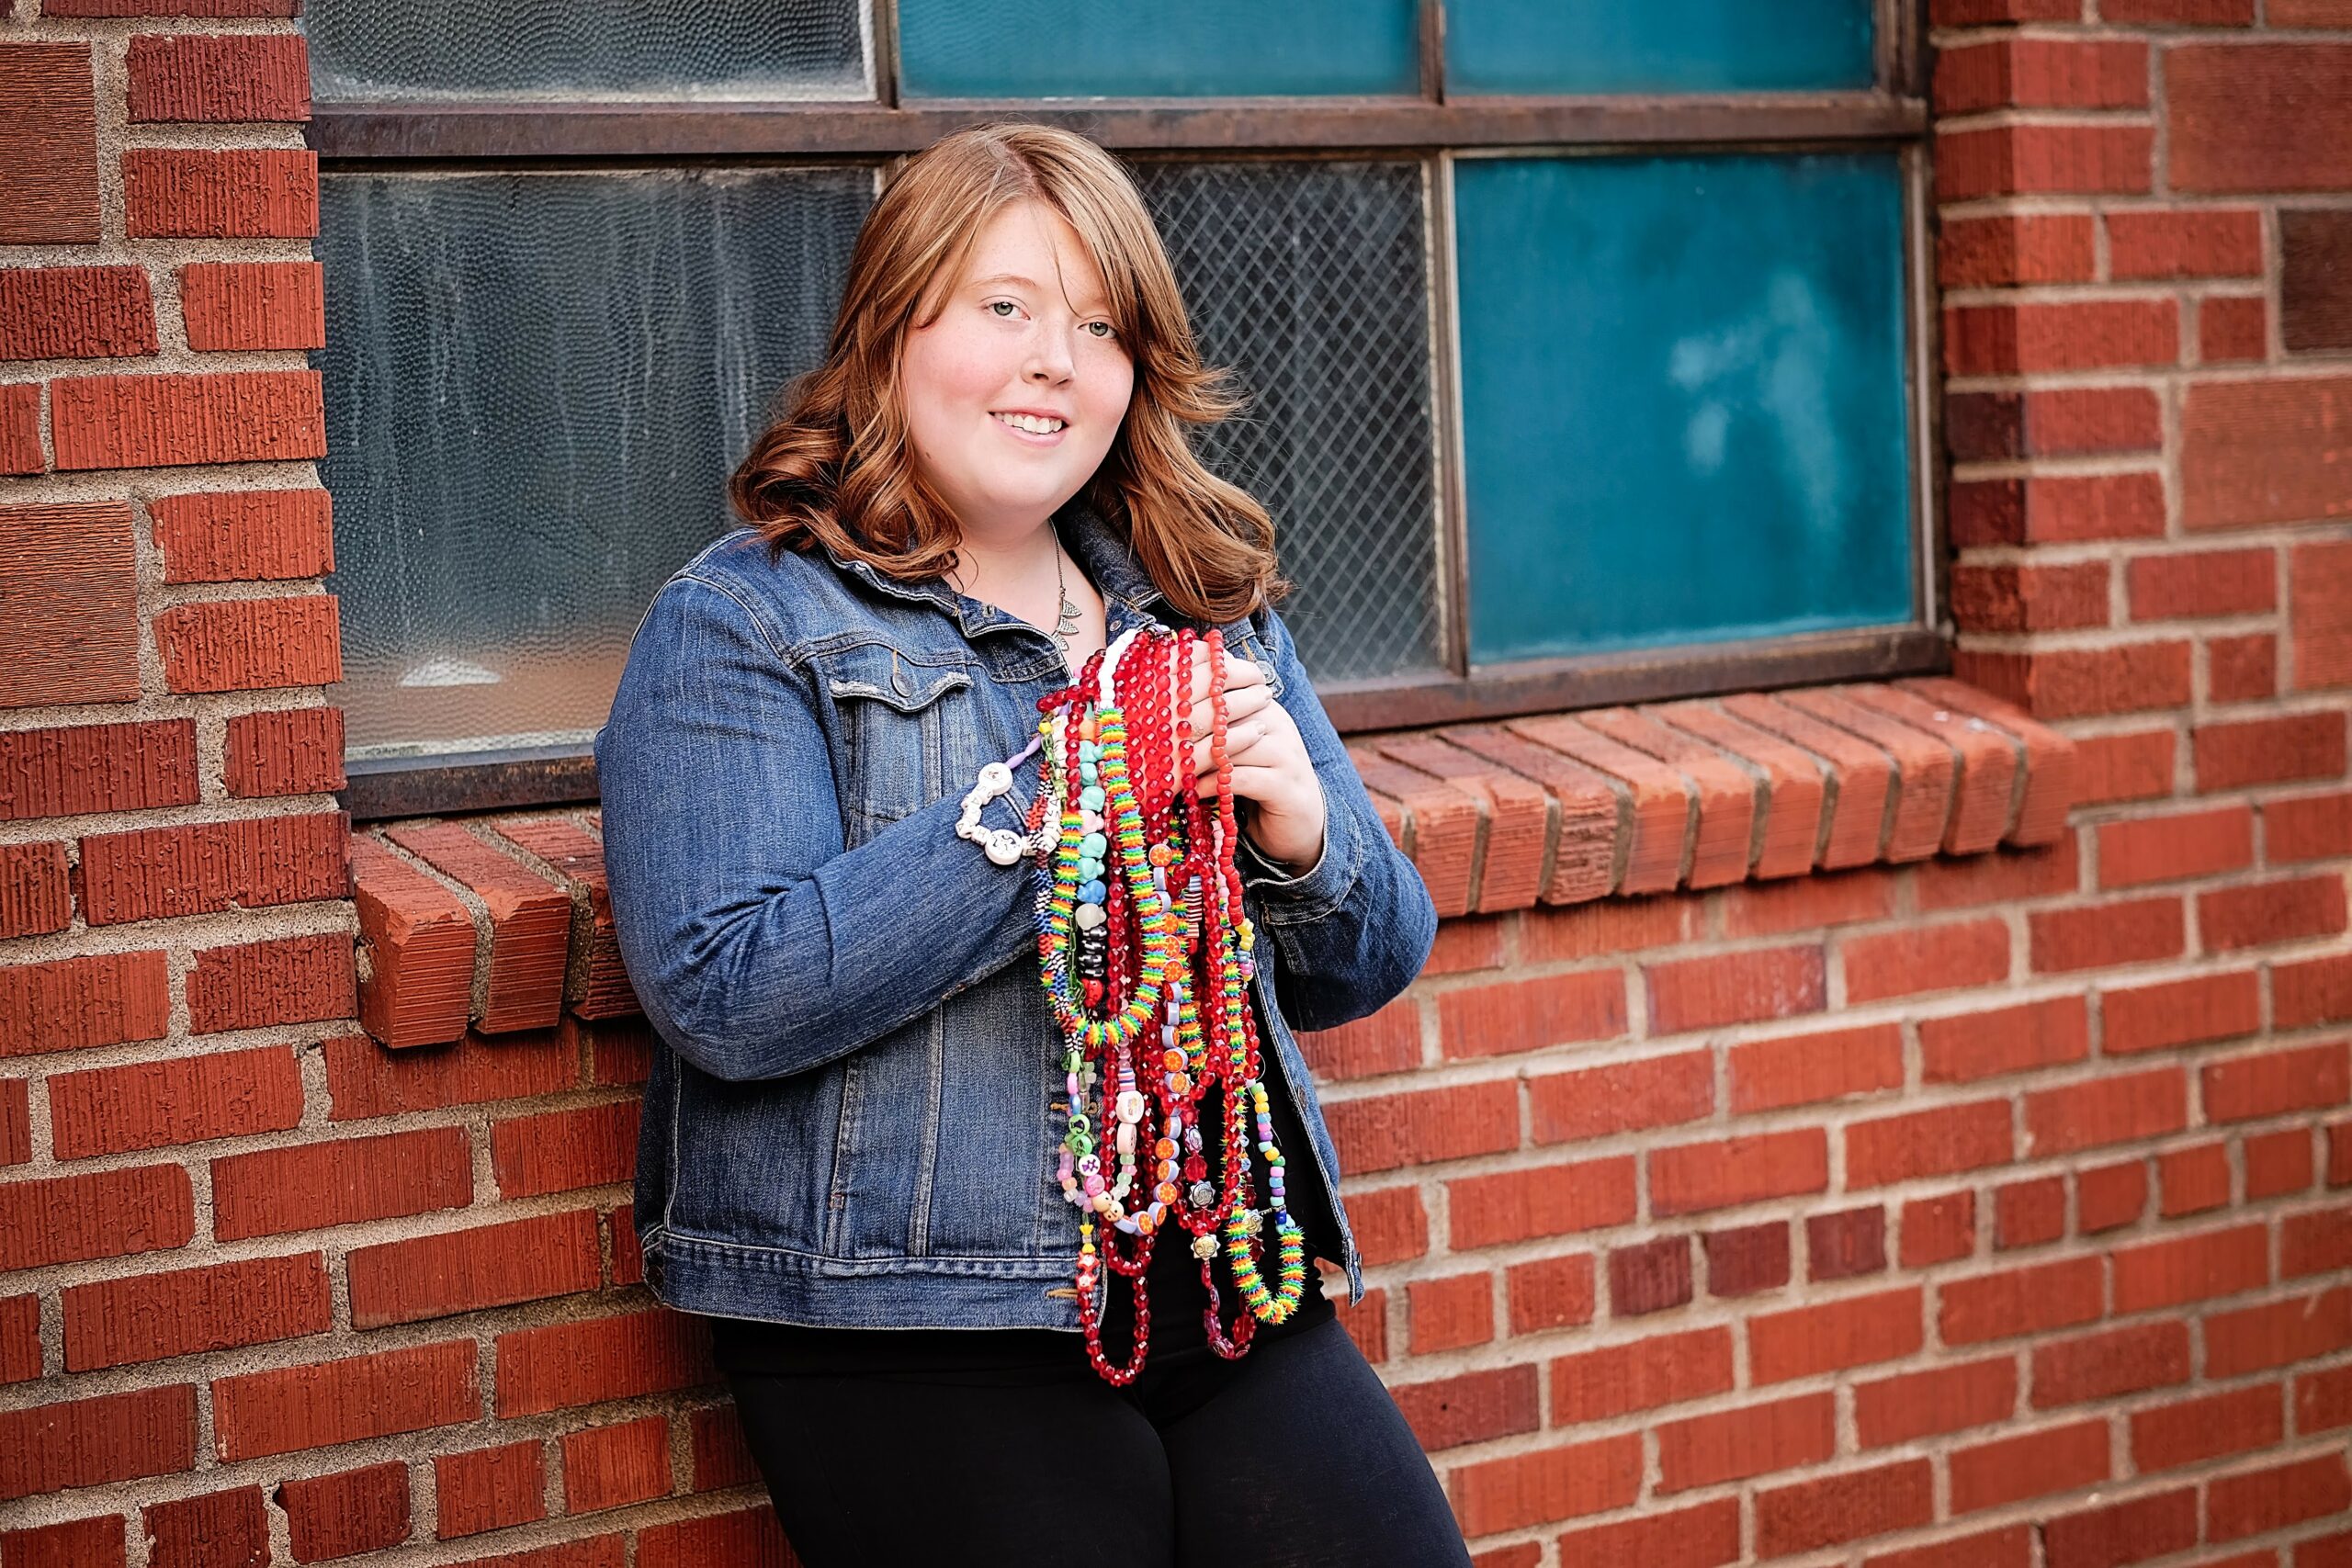 teen with beads4bravery